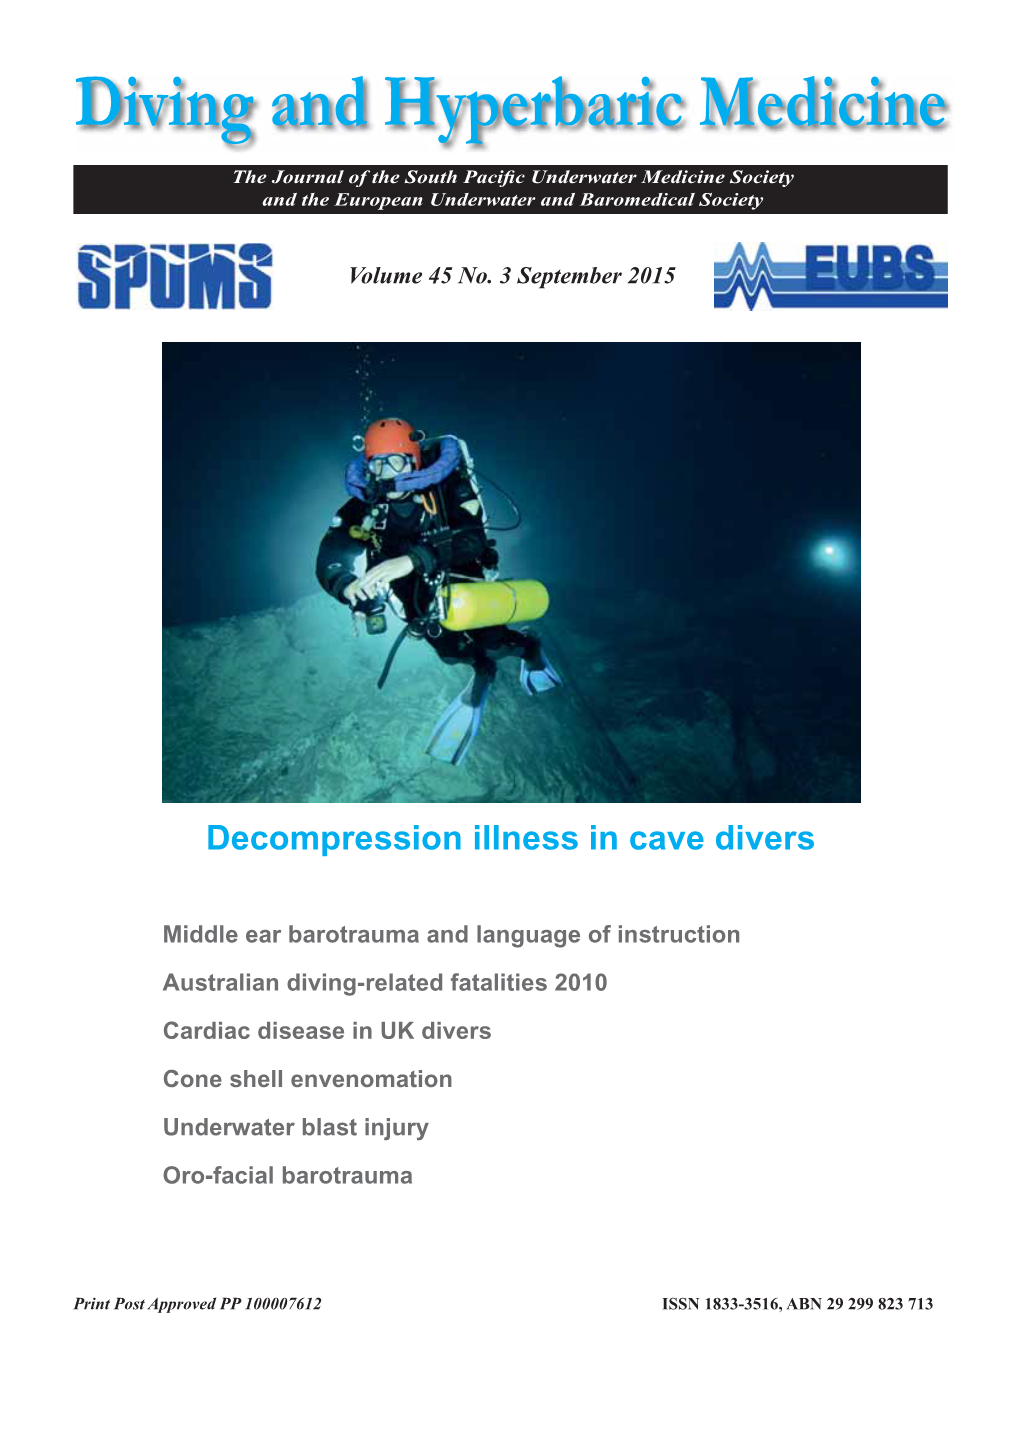 Decompression Illness in Cave Divers